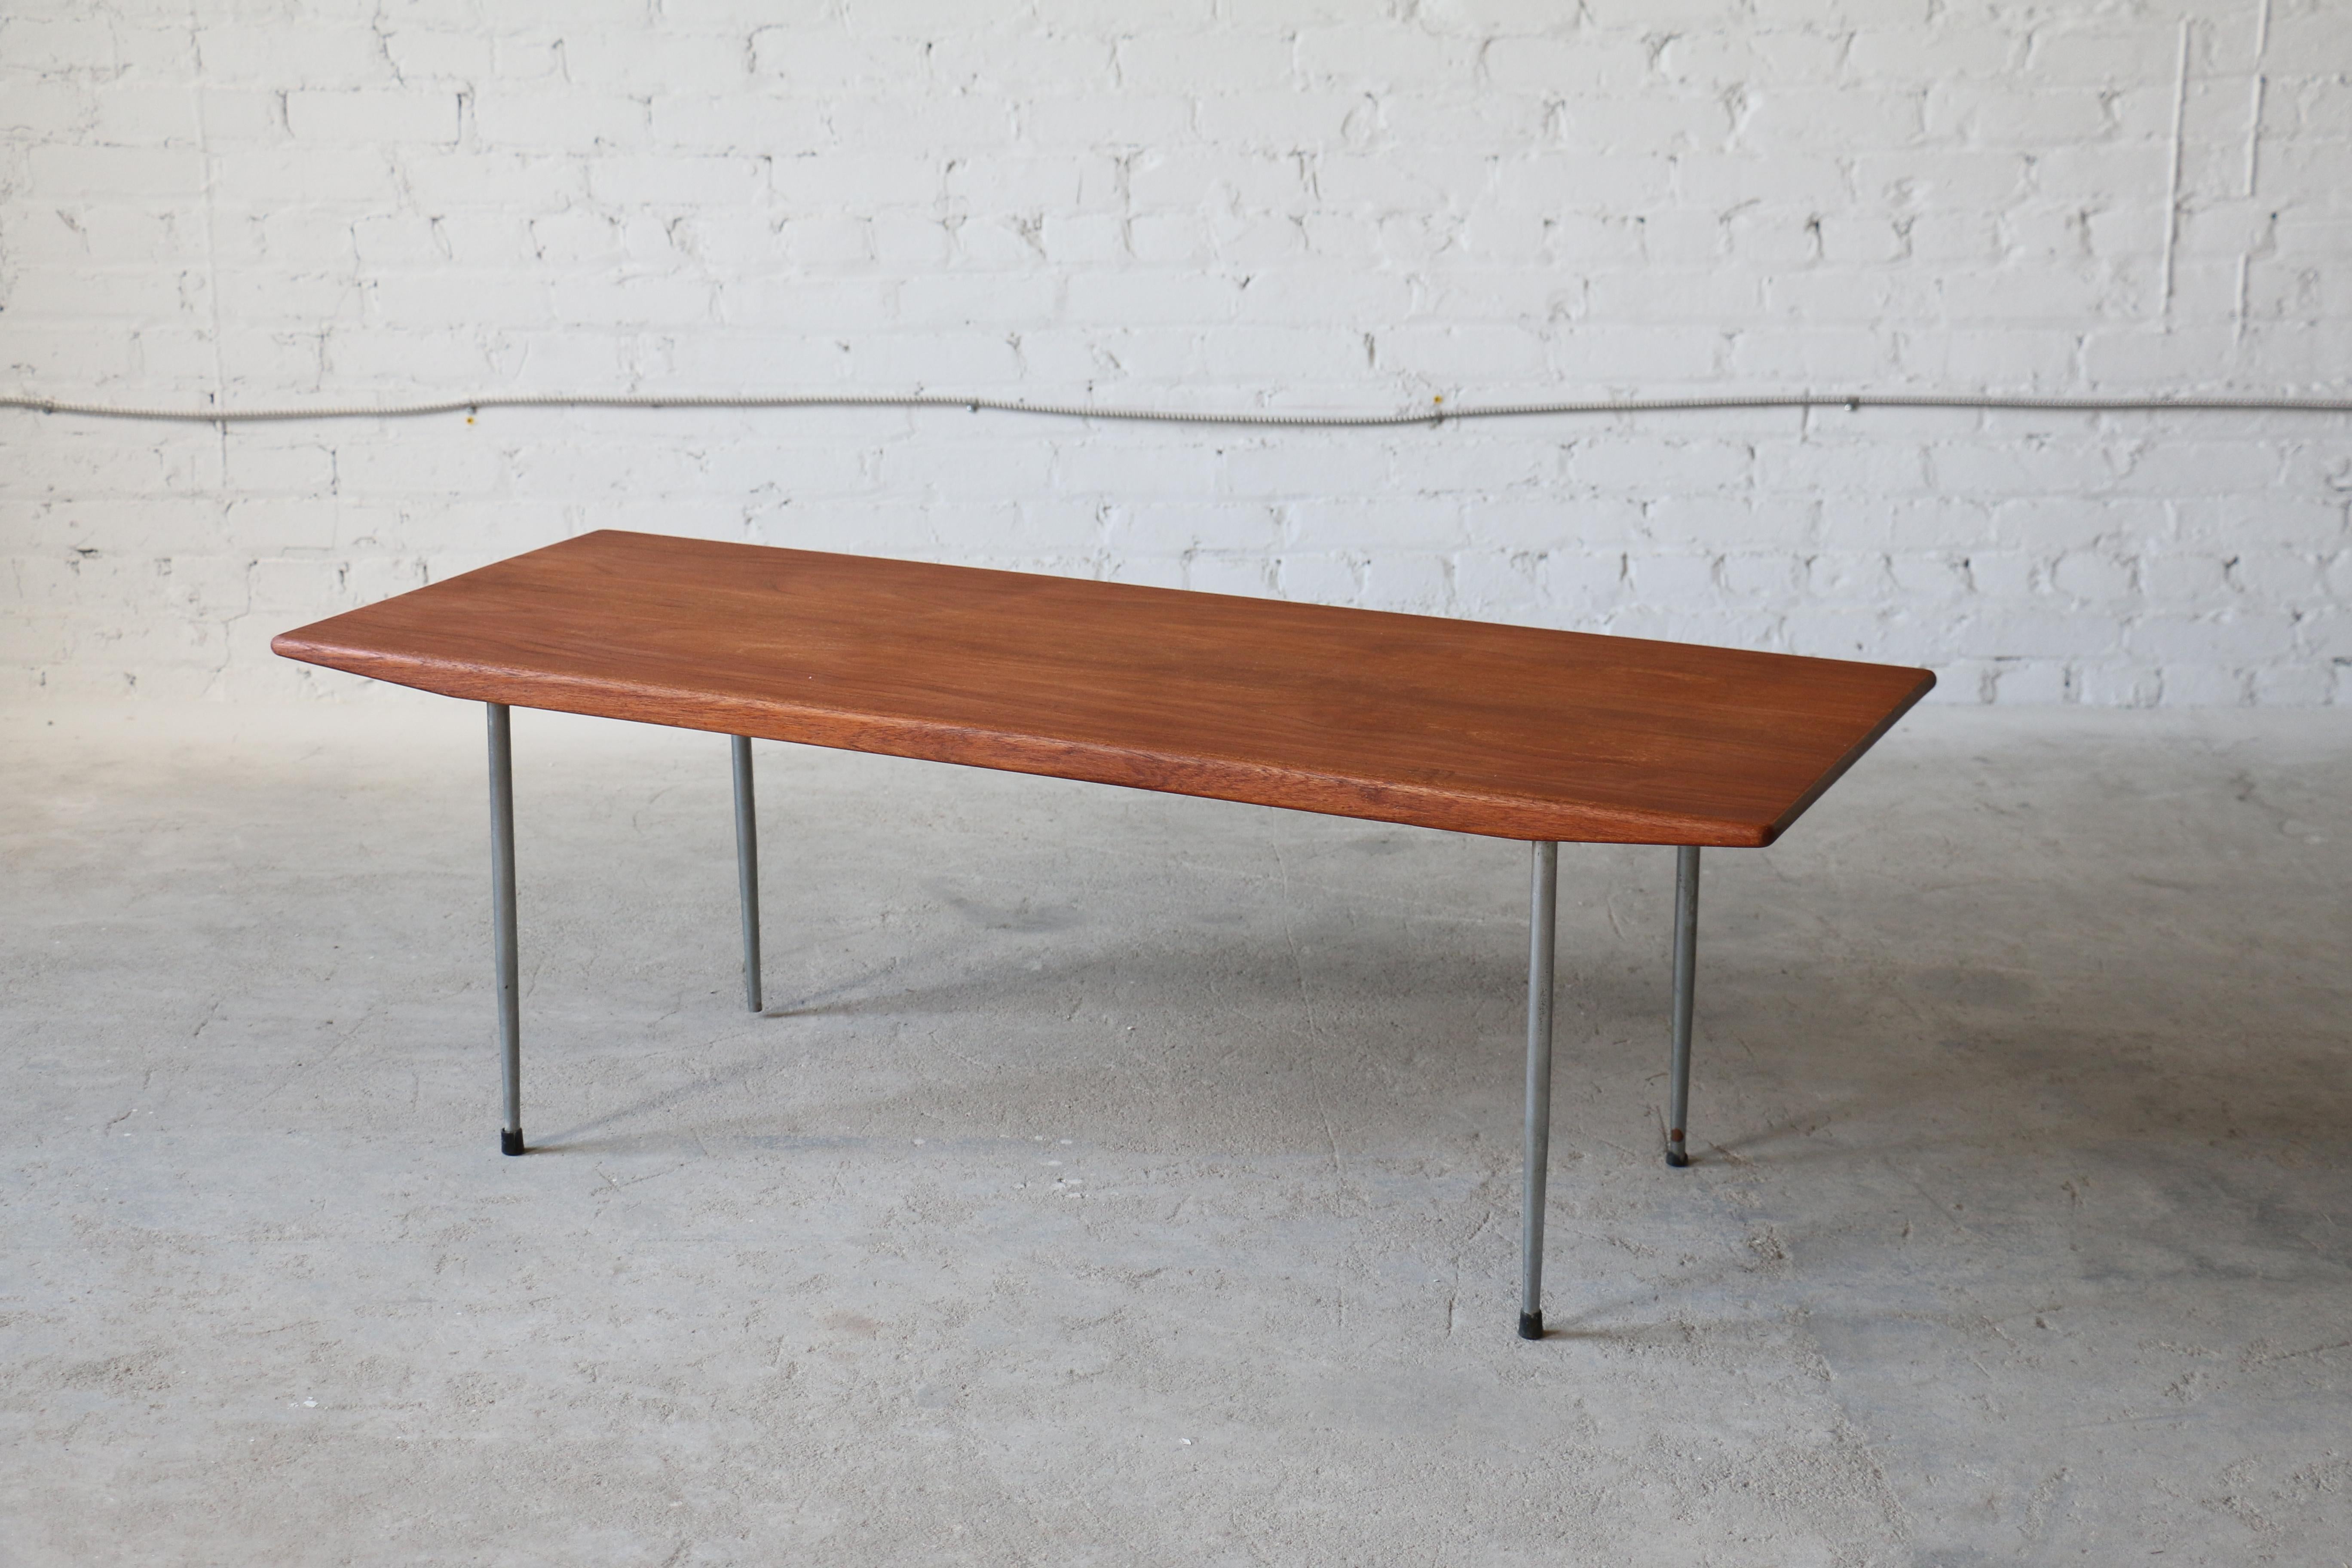 A very rare teak coffee table designed by Børge Mogensen for Tage Kristensen. This table was one of the first pieces Mogensen designed with the use of metal as an element. This table matched an easy chair design for Tage Kristensen as well as a